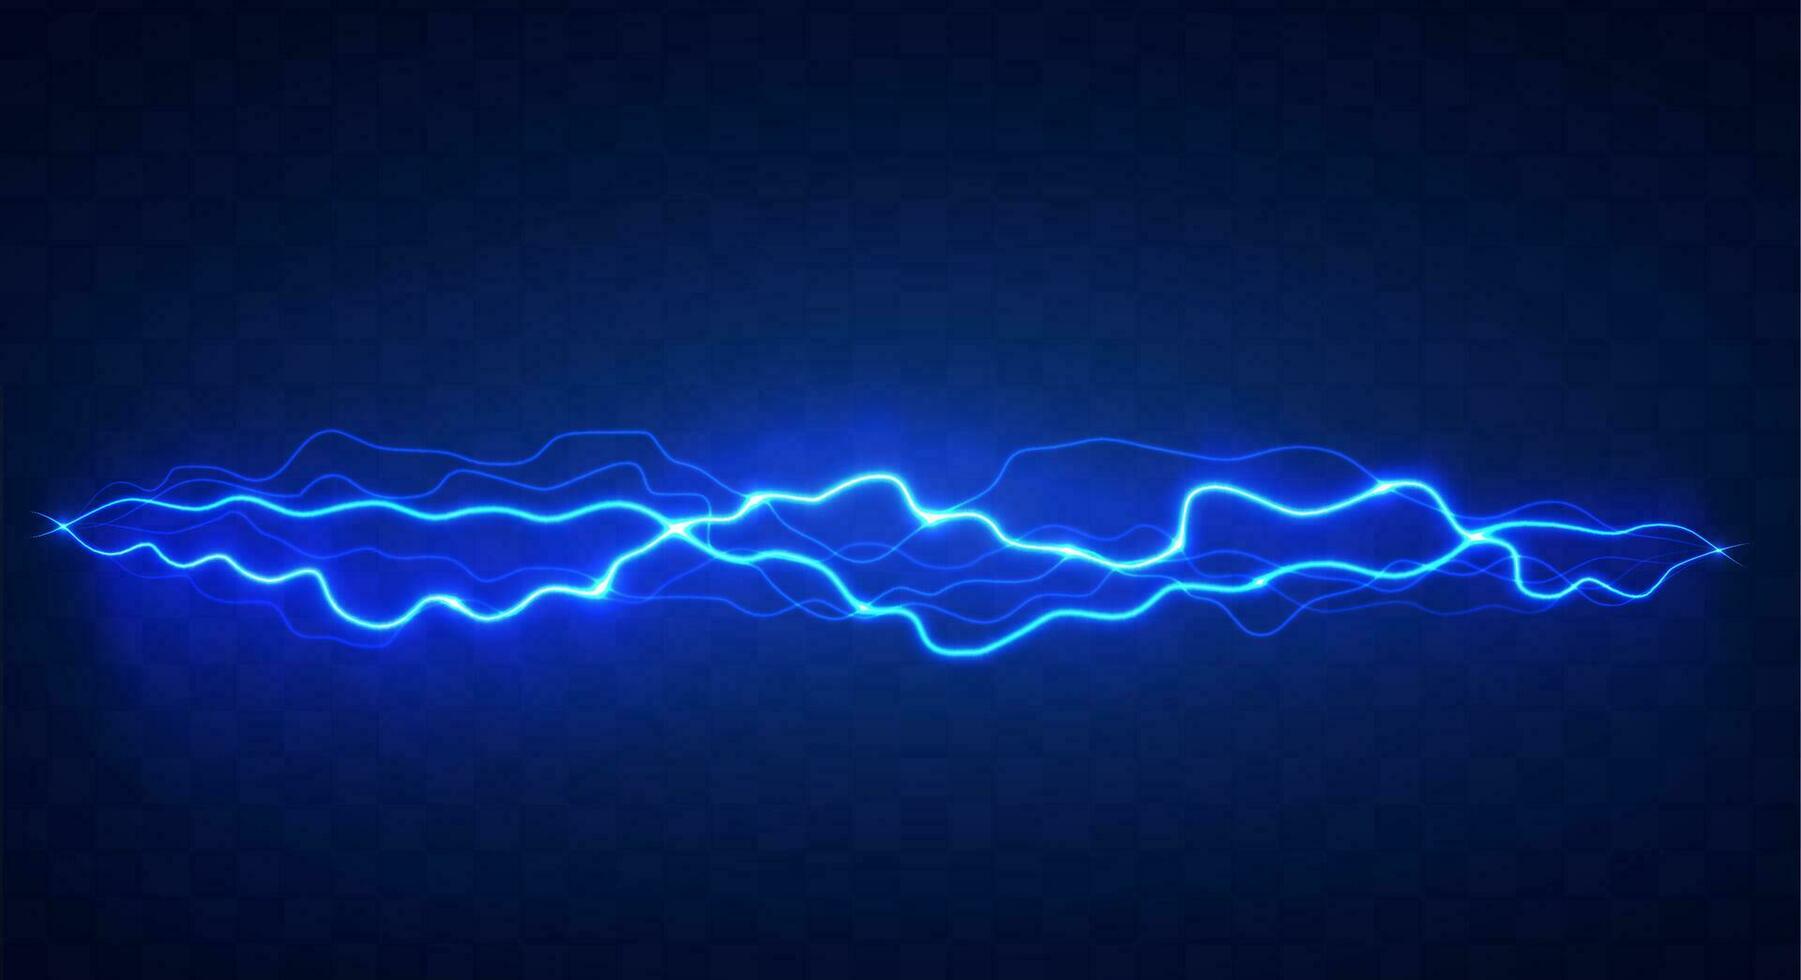 Lightning flash effect. Realistic electric lightning, Abstract background in the form of lightning. A powerful charge causes many sparks. Power of nature. vector